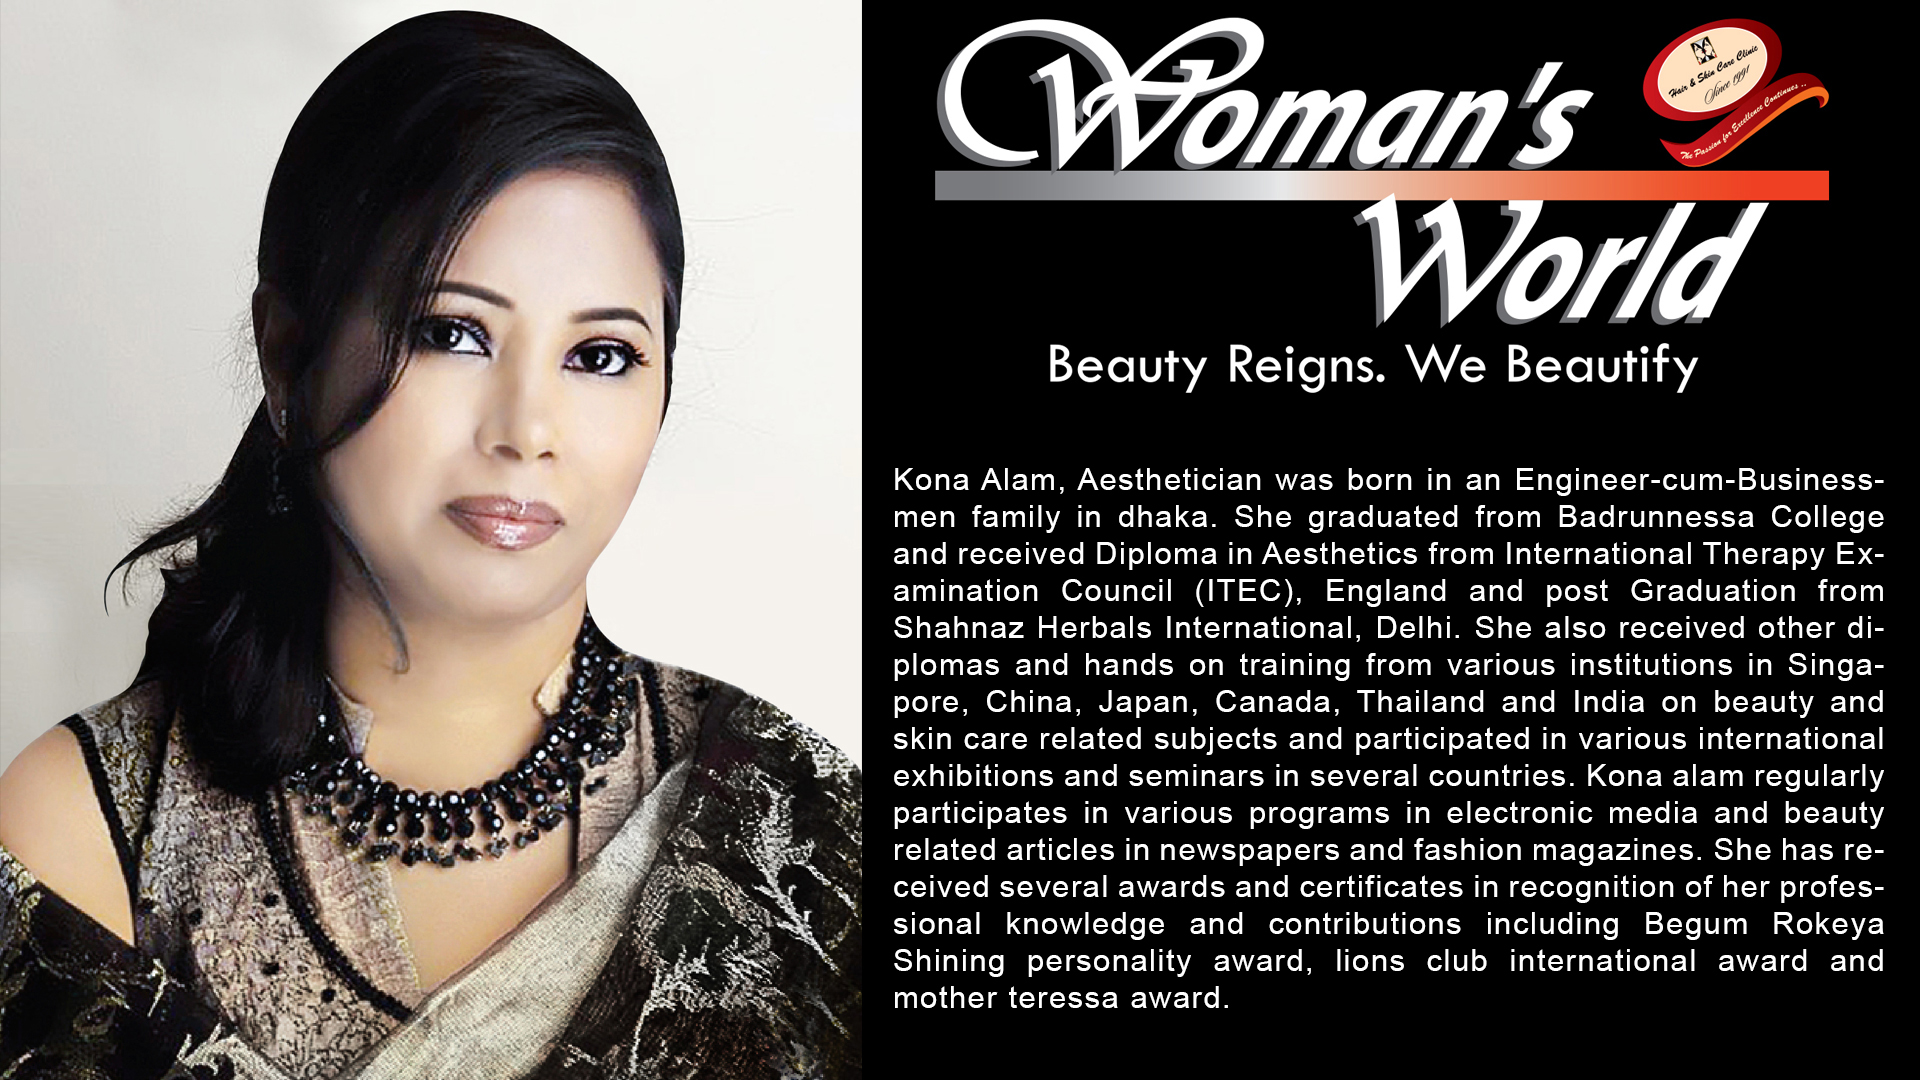 Woman's World – We care beauty care